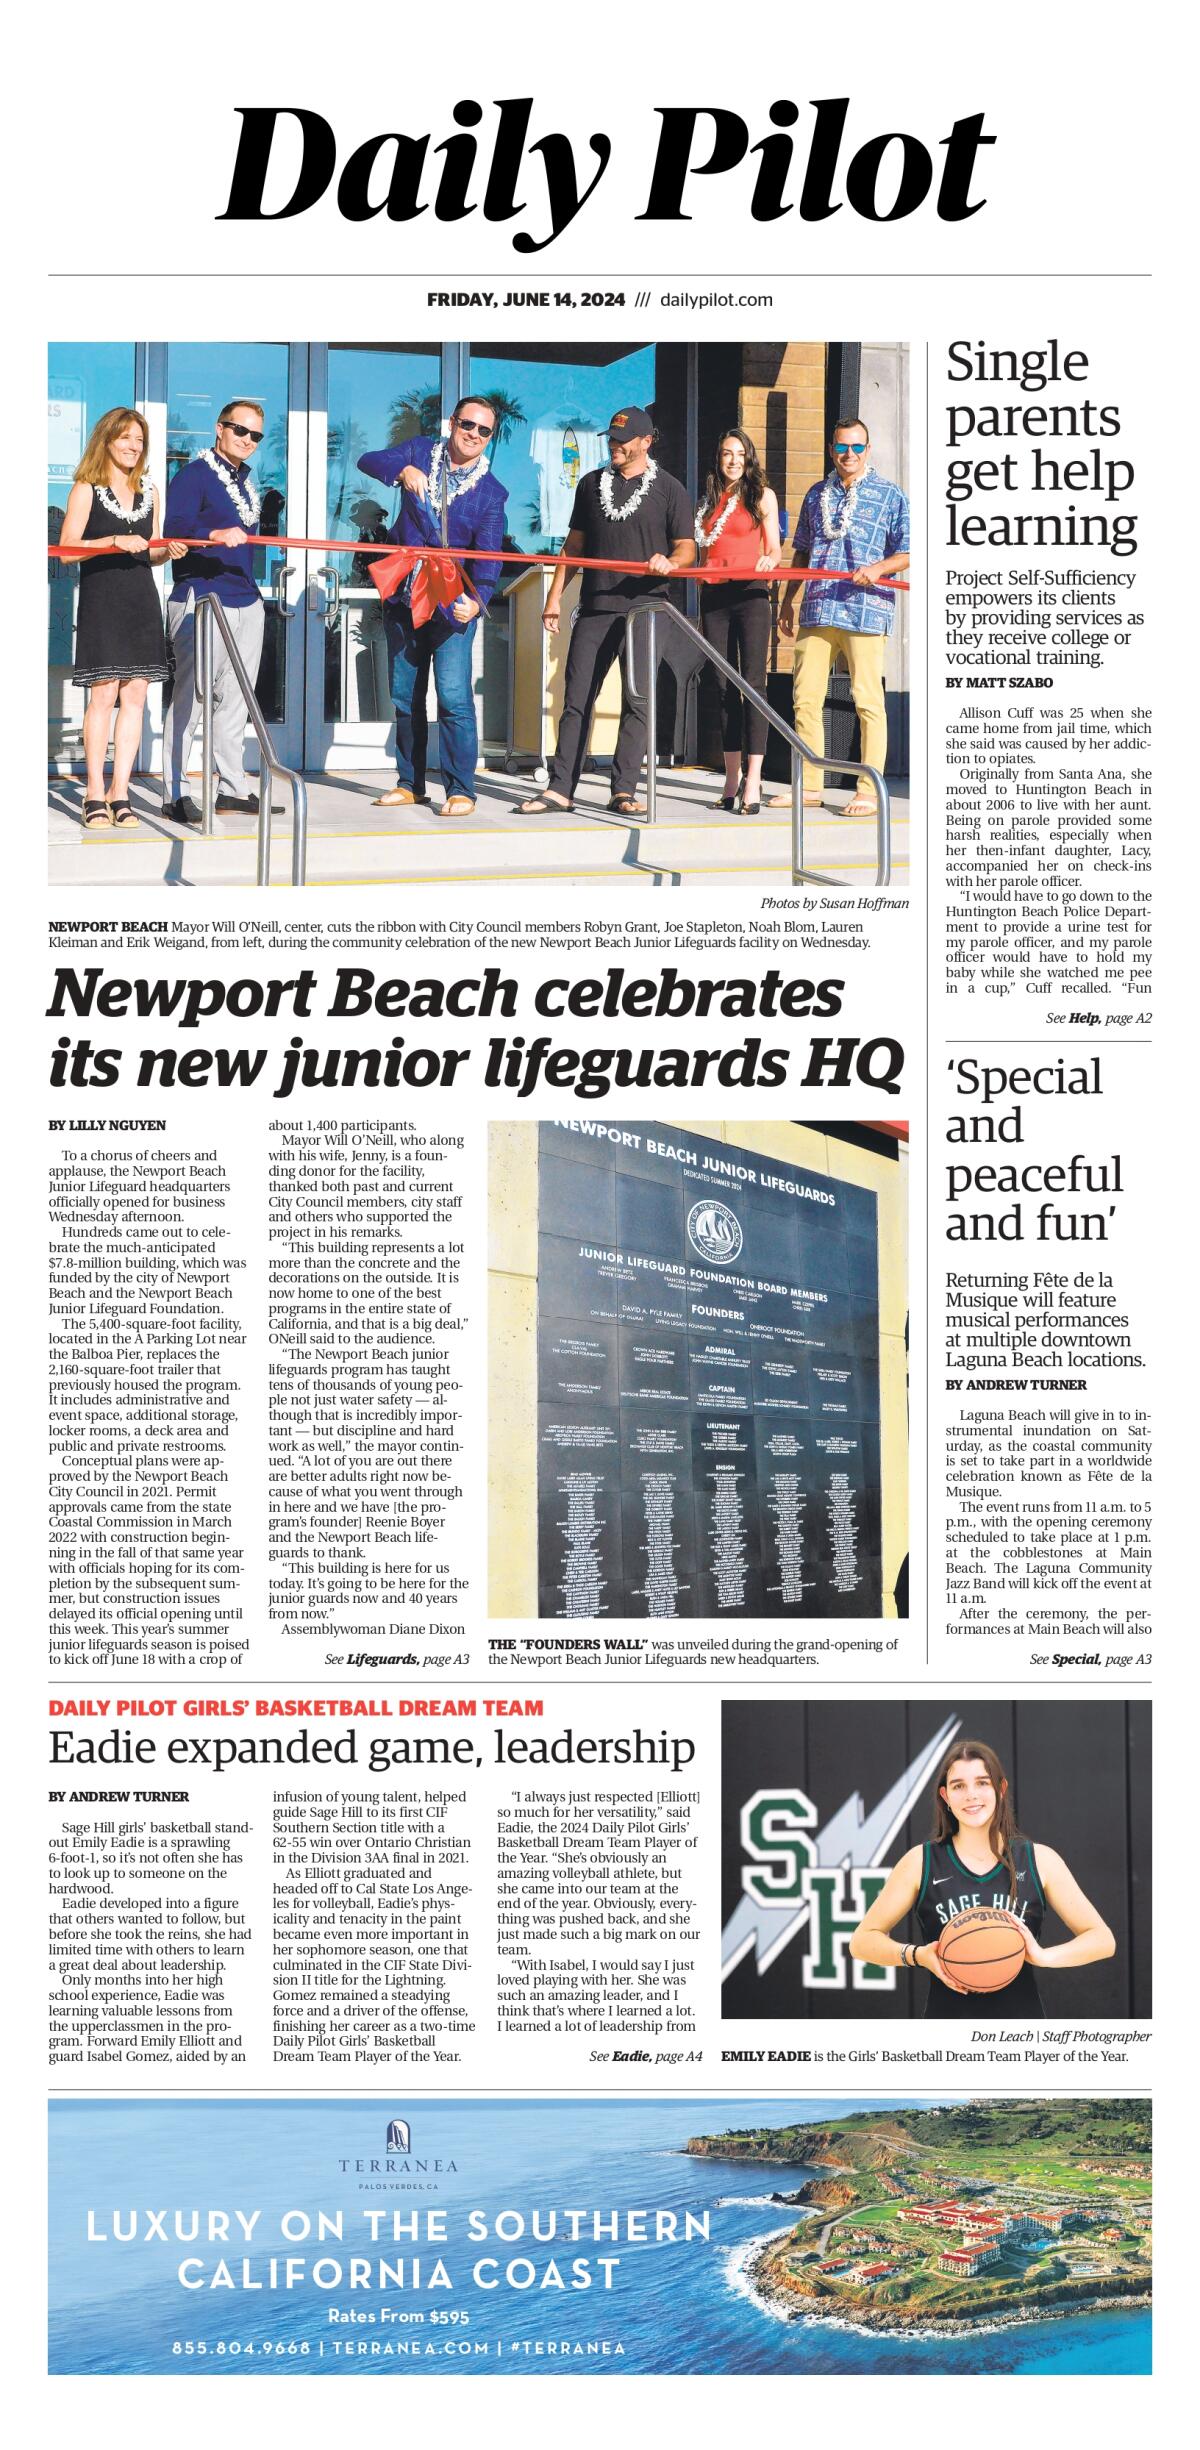 Front page of the Daily Pilot e-newspaper for Friday, June 14, 2024.